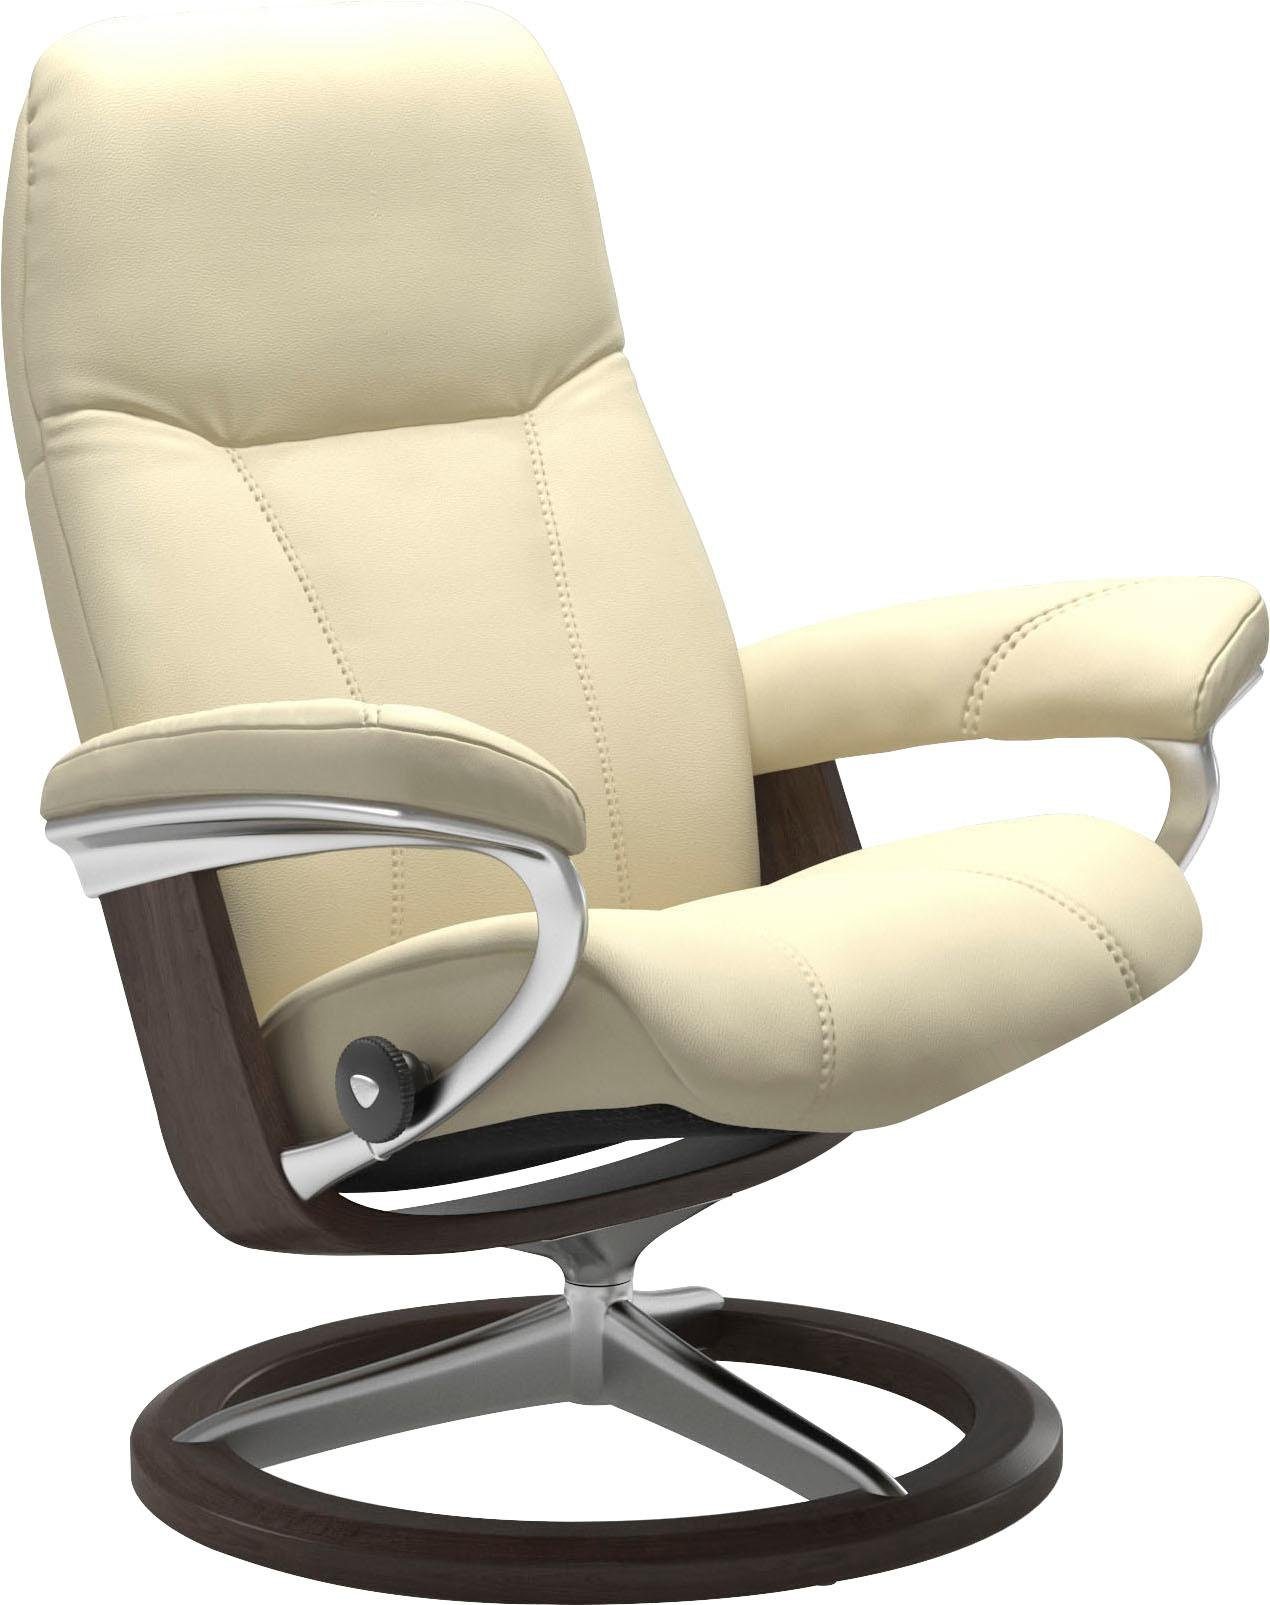 Stressless® Relaxsessel Consul, mit Signature Base, Gestell Wenge L, Größe